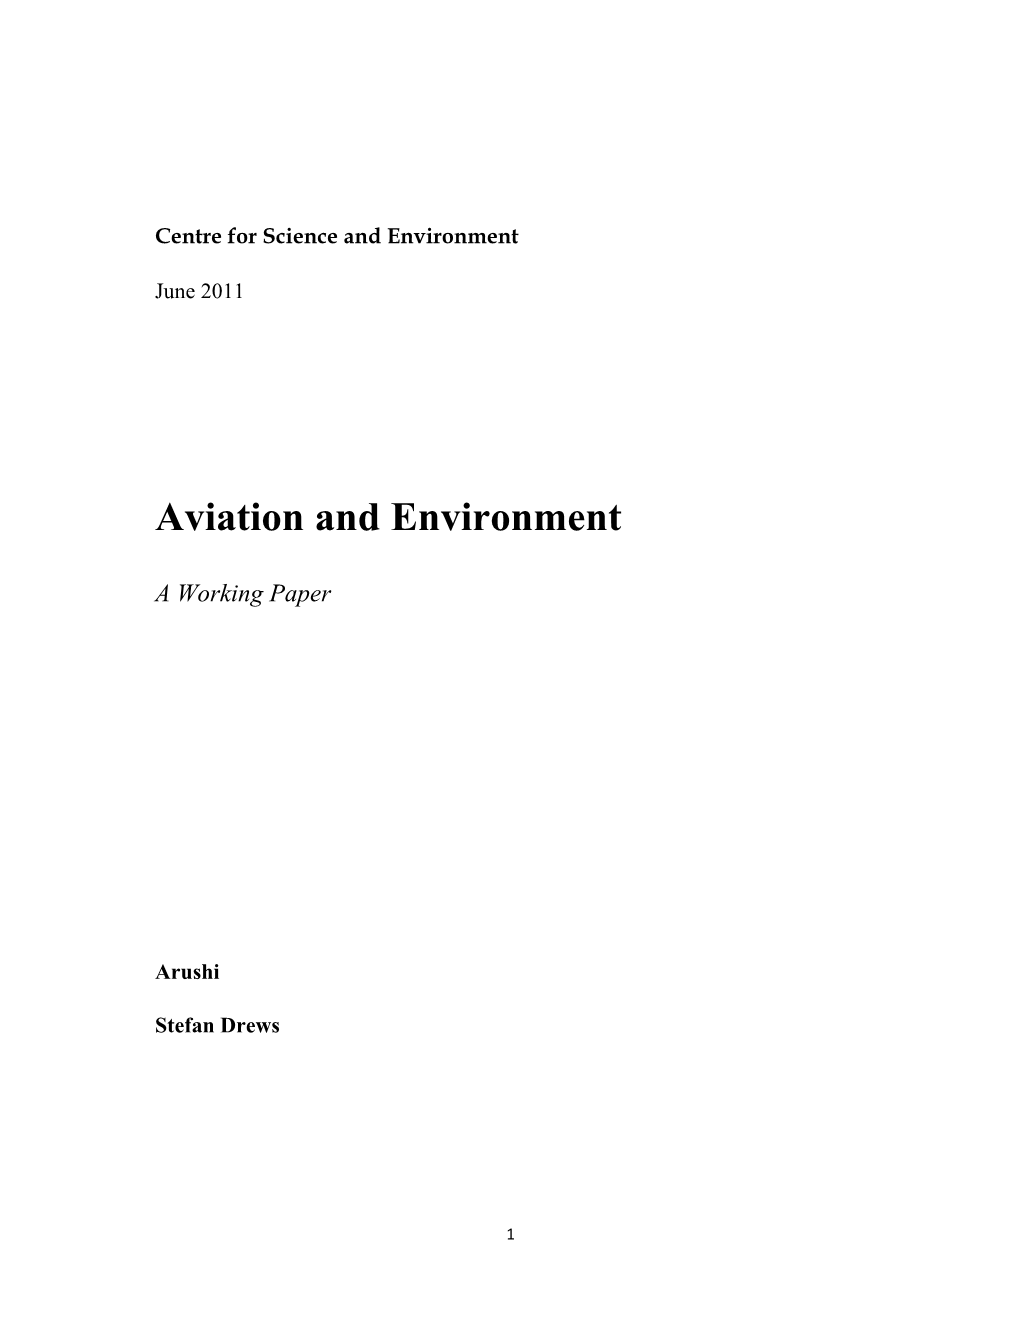 Aviation and Environment